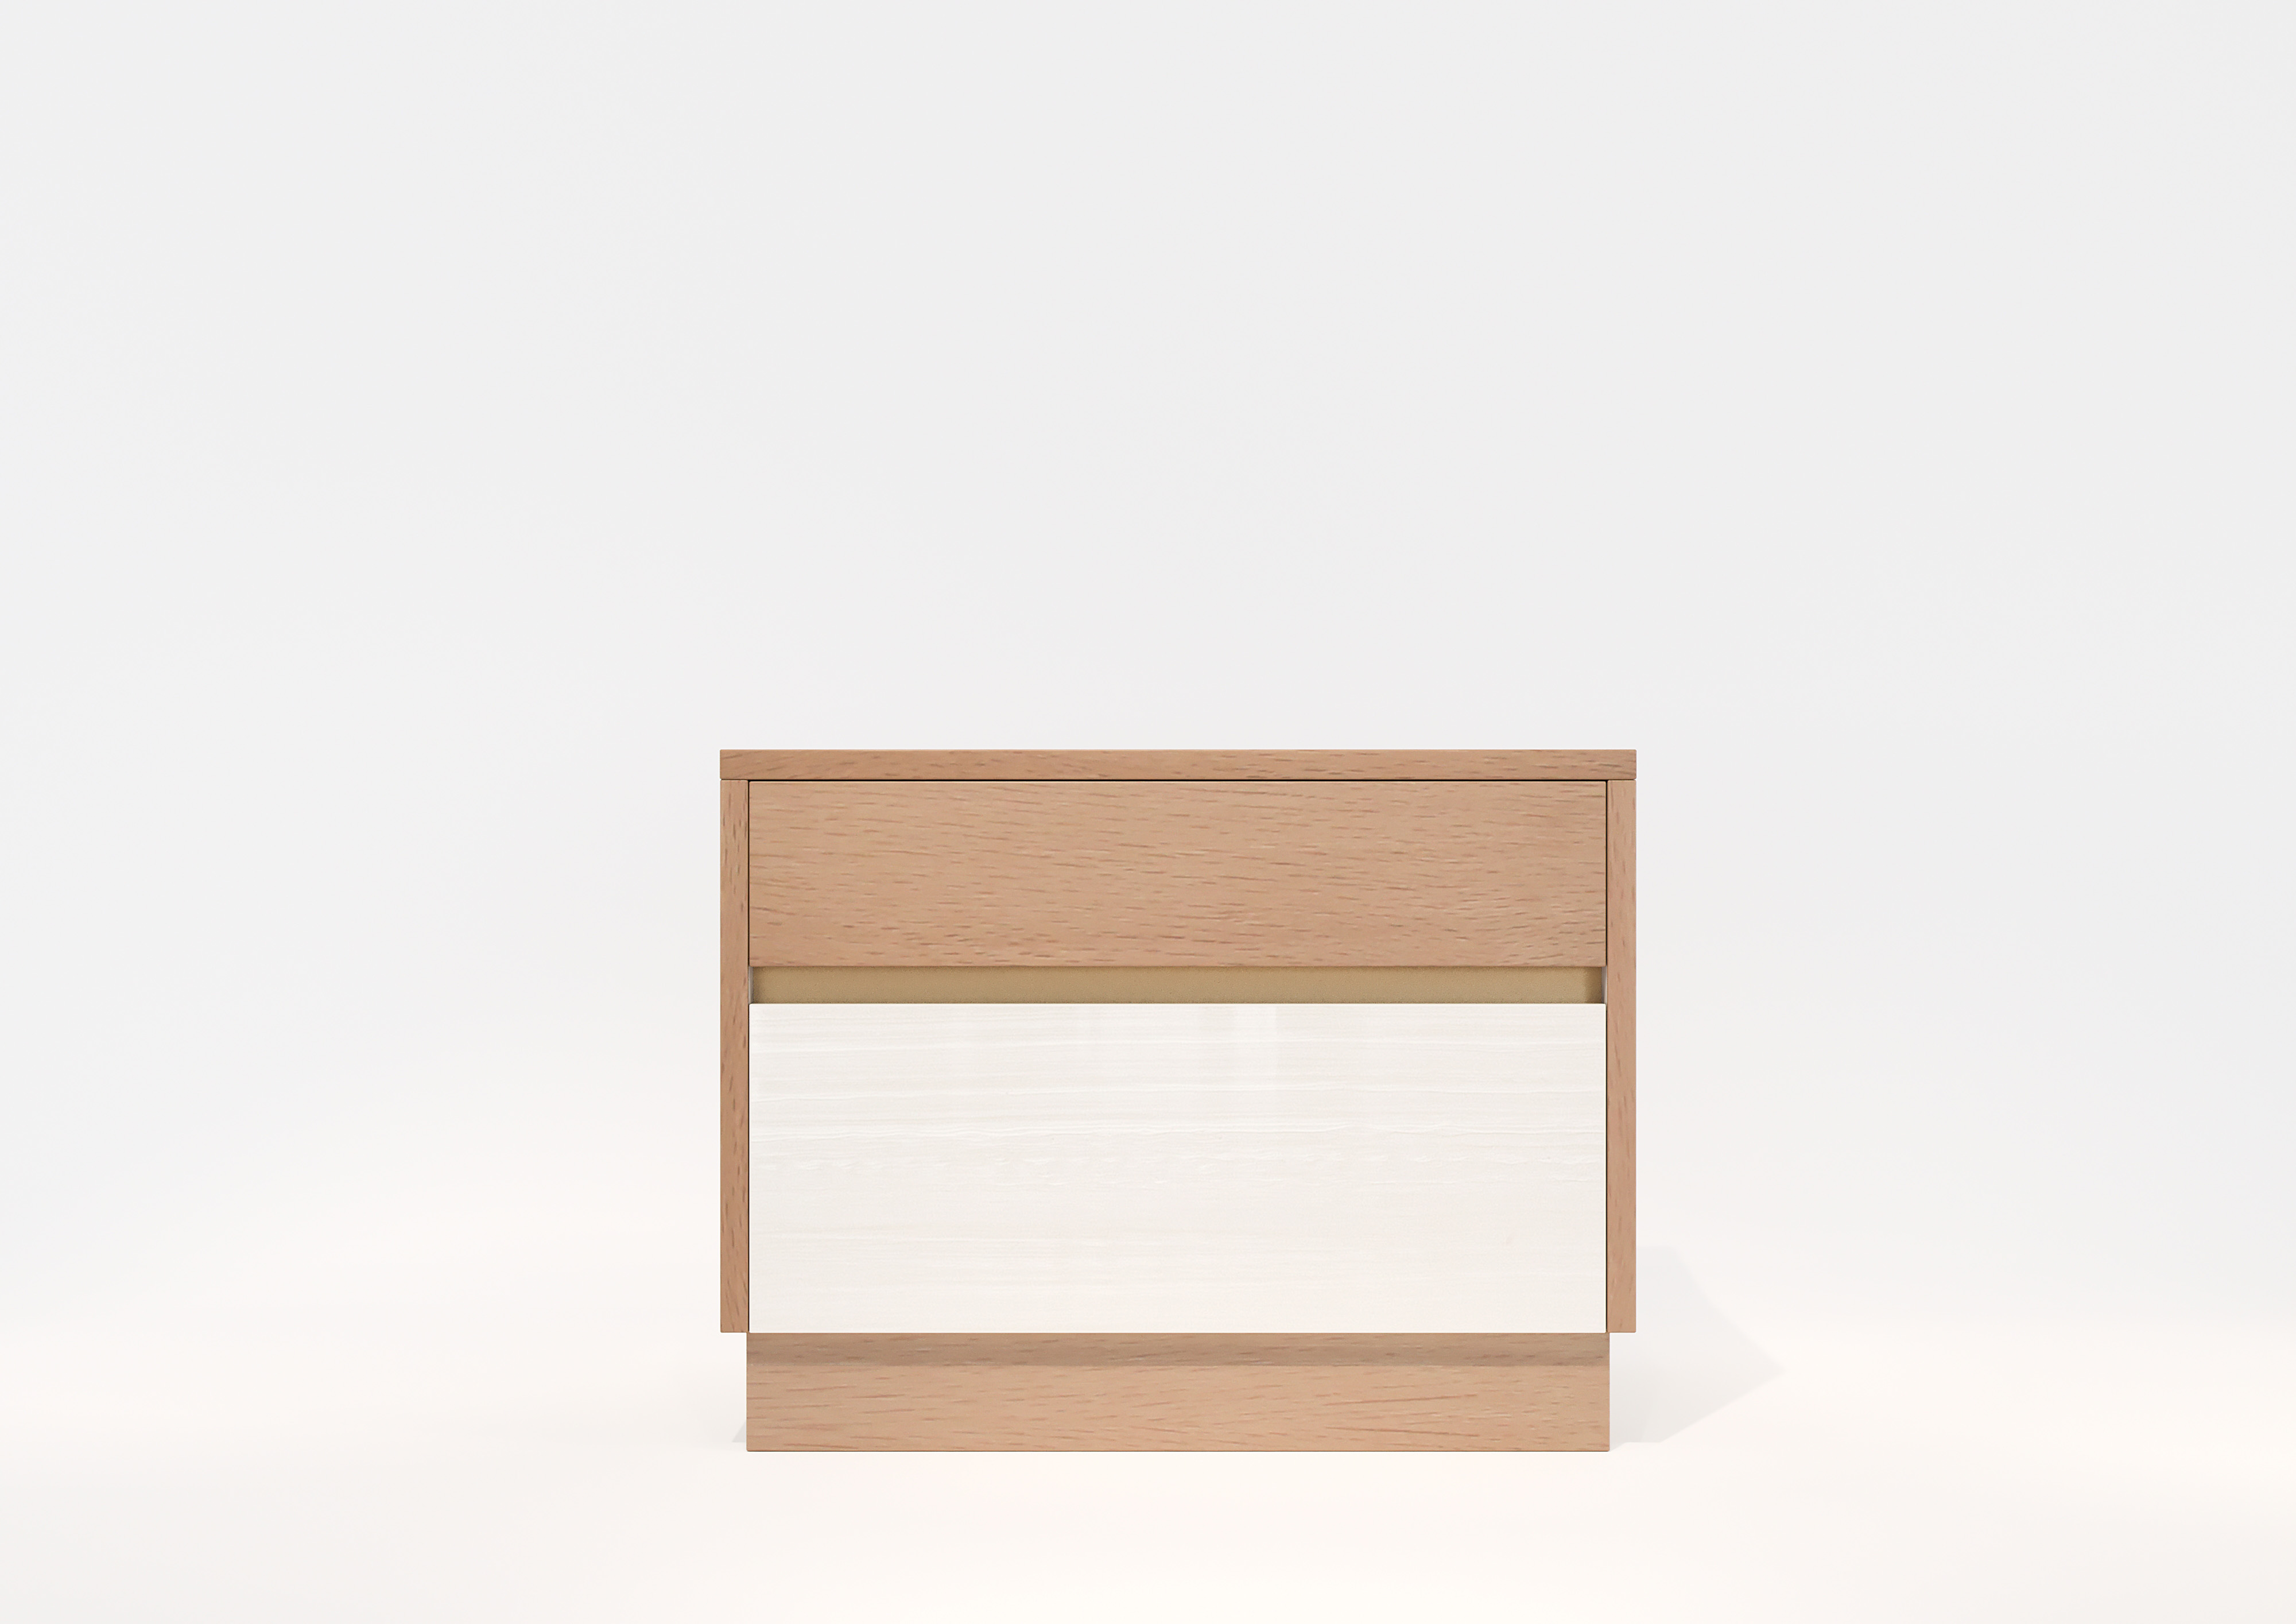 Downing Nightstand V2 Wood Edition #08 – $3,255.00